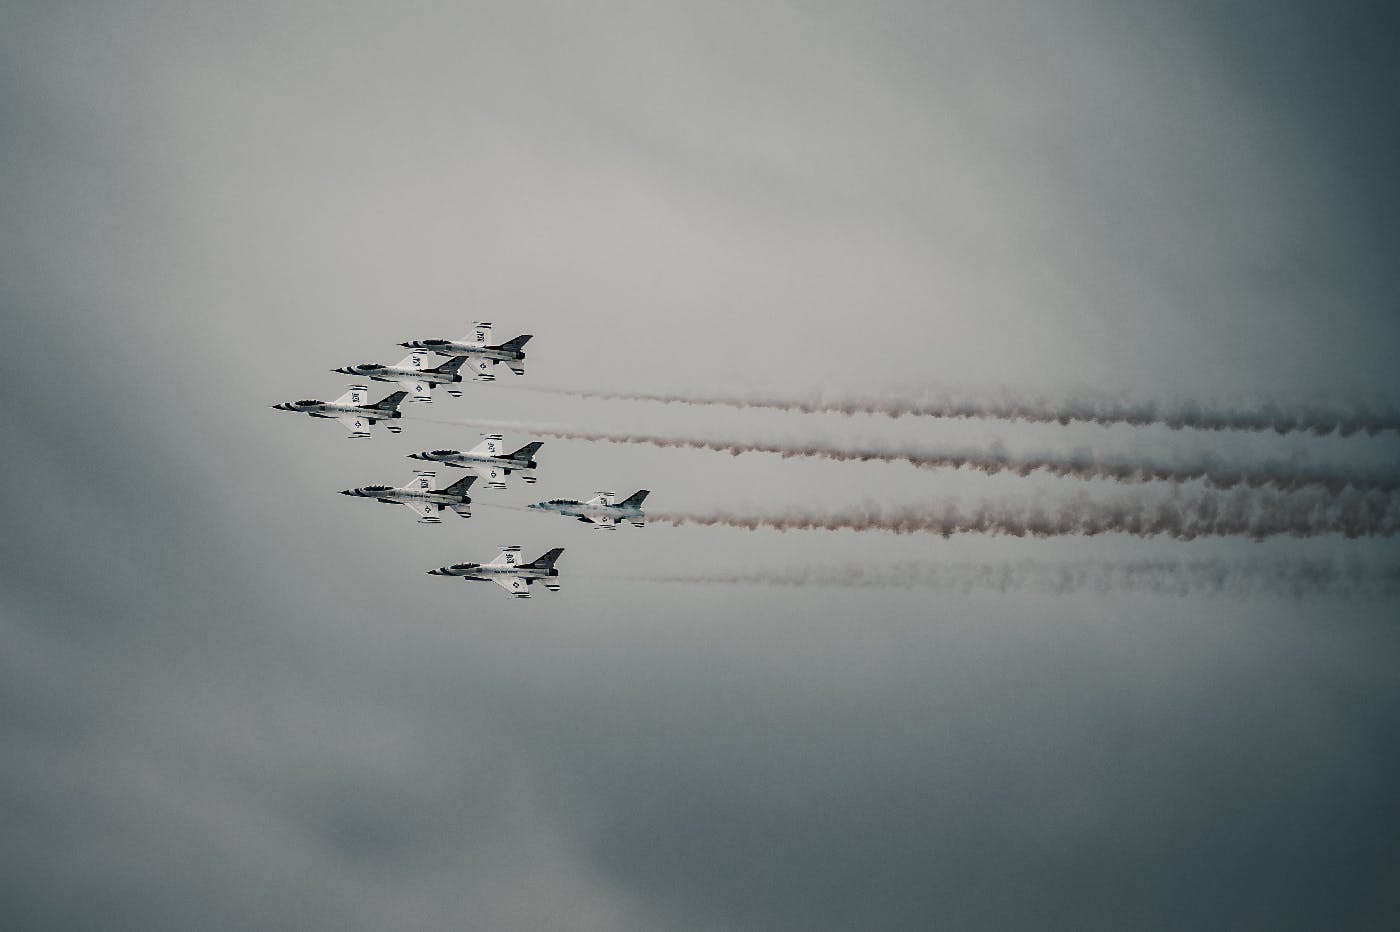 Eight fighter jets, in formation against a grey sky